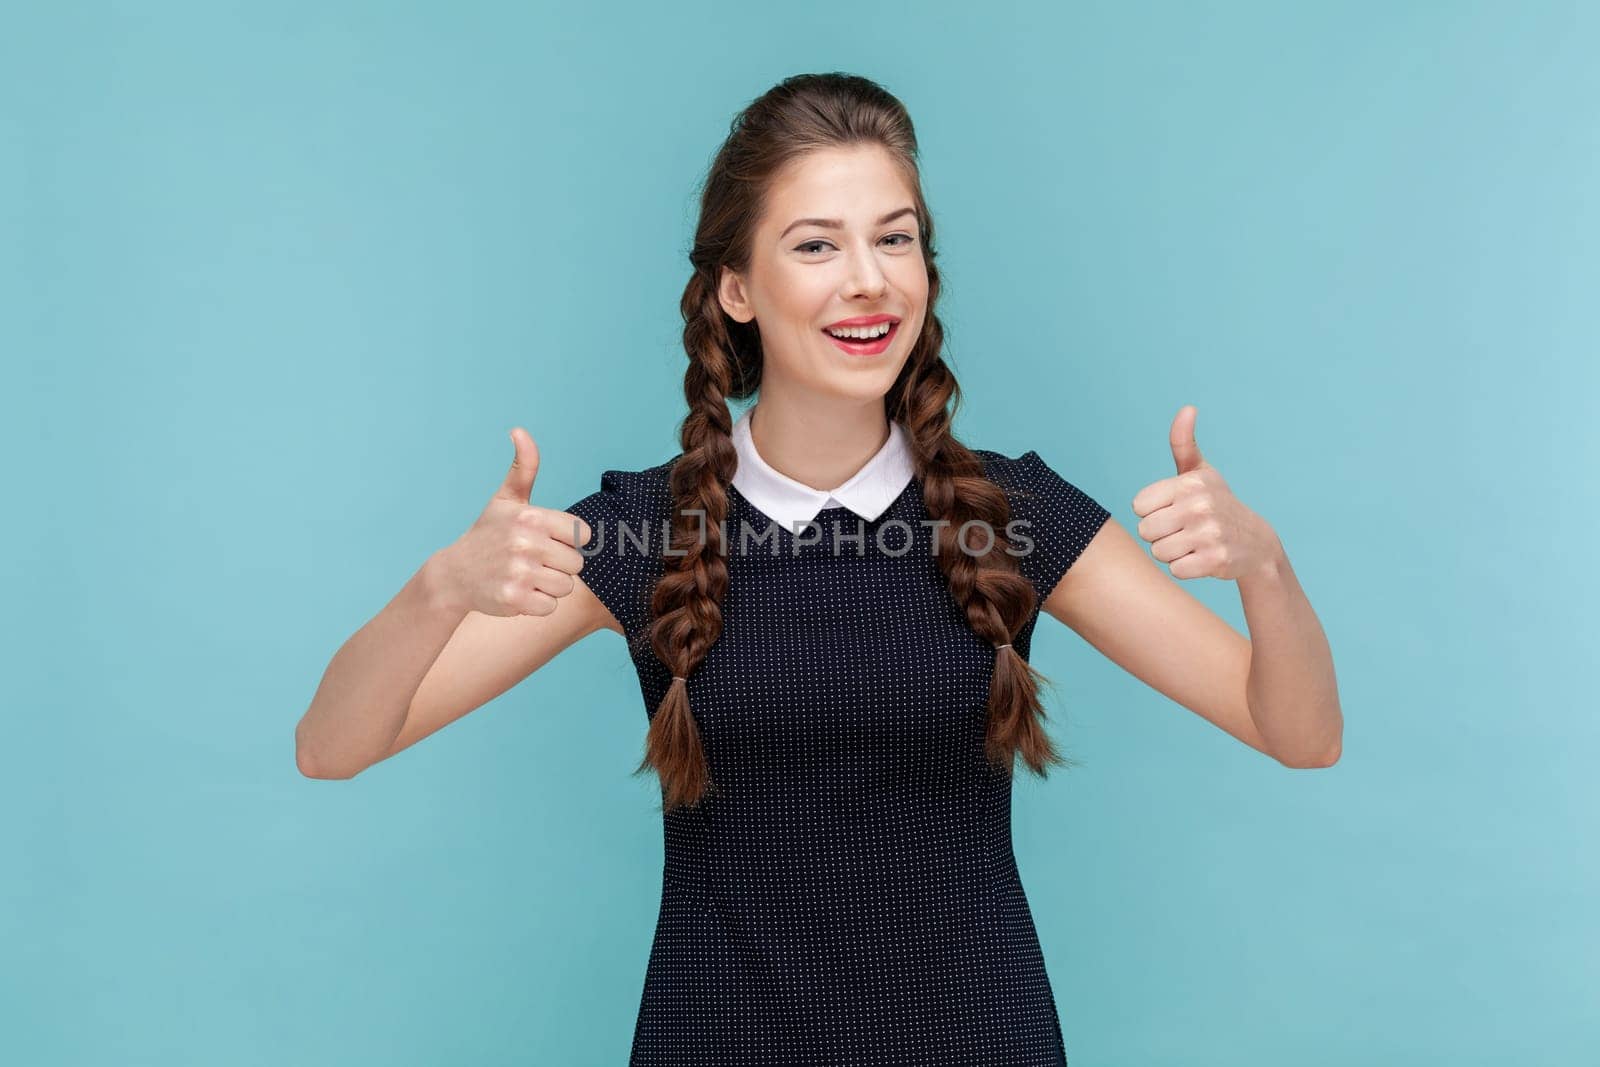 Portrait of attractive positive smiling woman with braids keeps thumb raised, being in good mood, shows her agreement, wearing black dress. woman Indoor studio shot isolated on blue background.